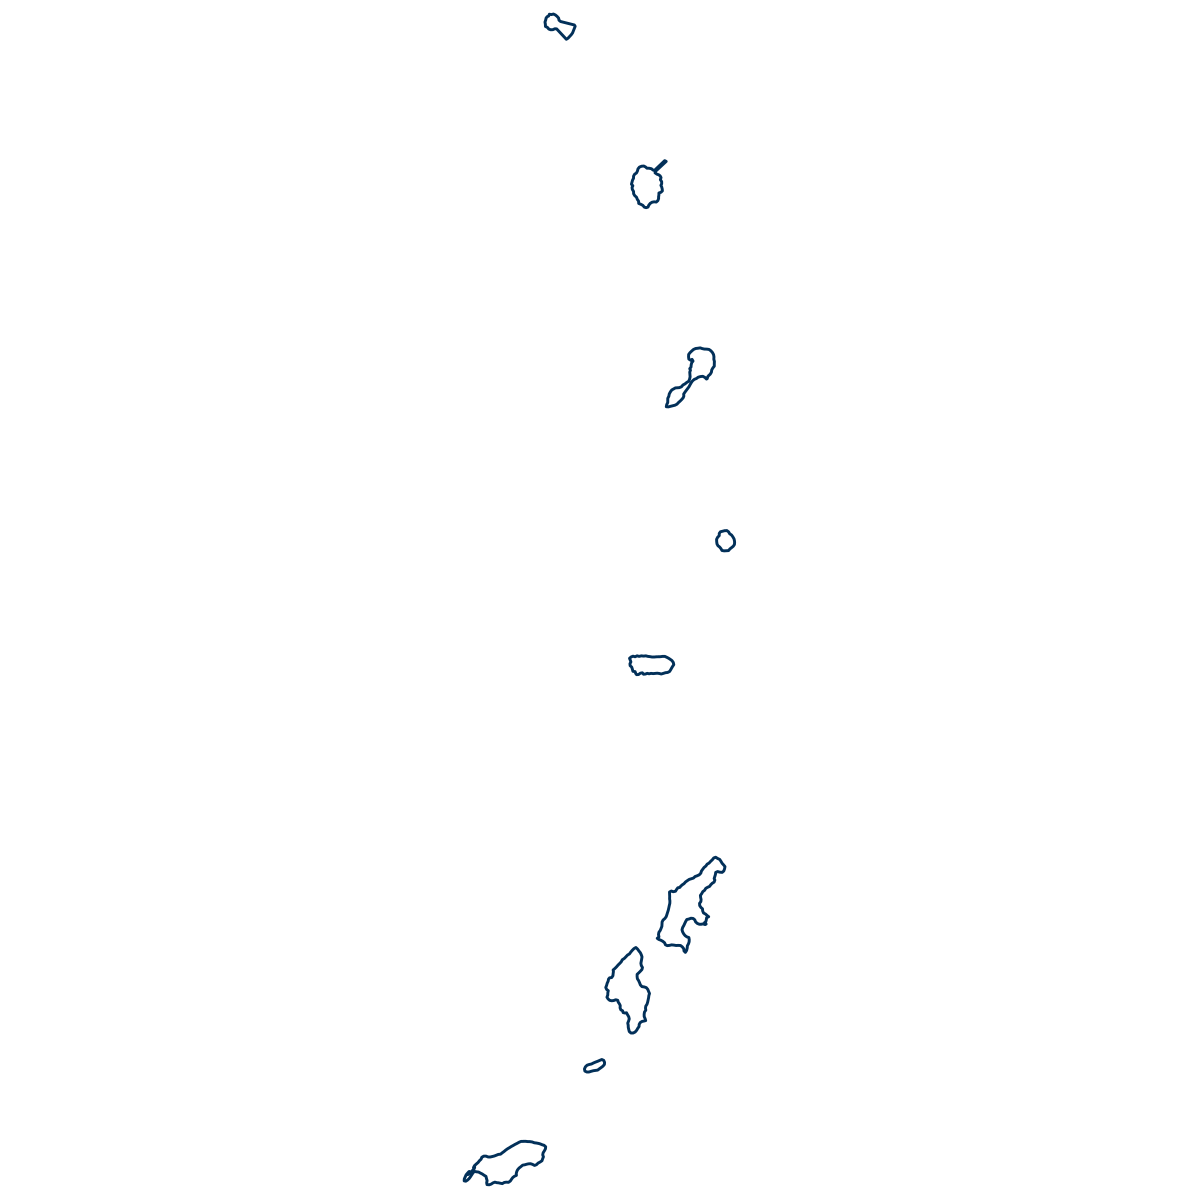 Map outline of the Northern Mariana Islands.